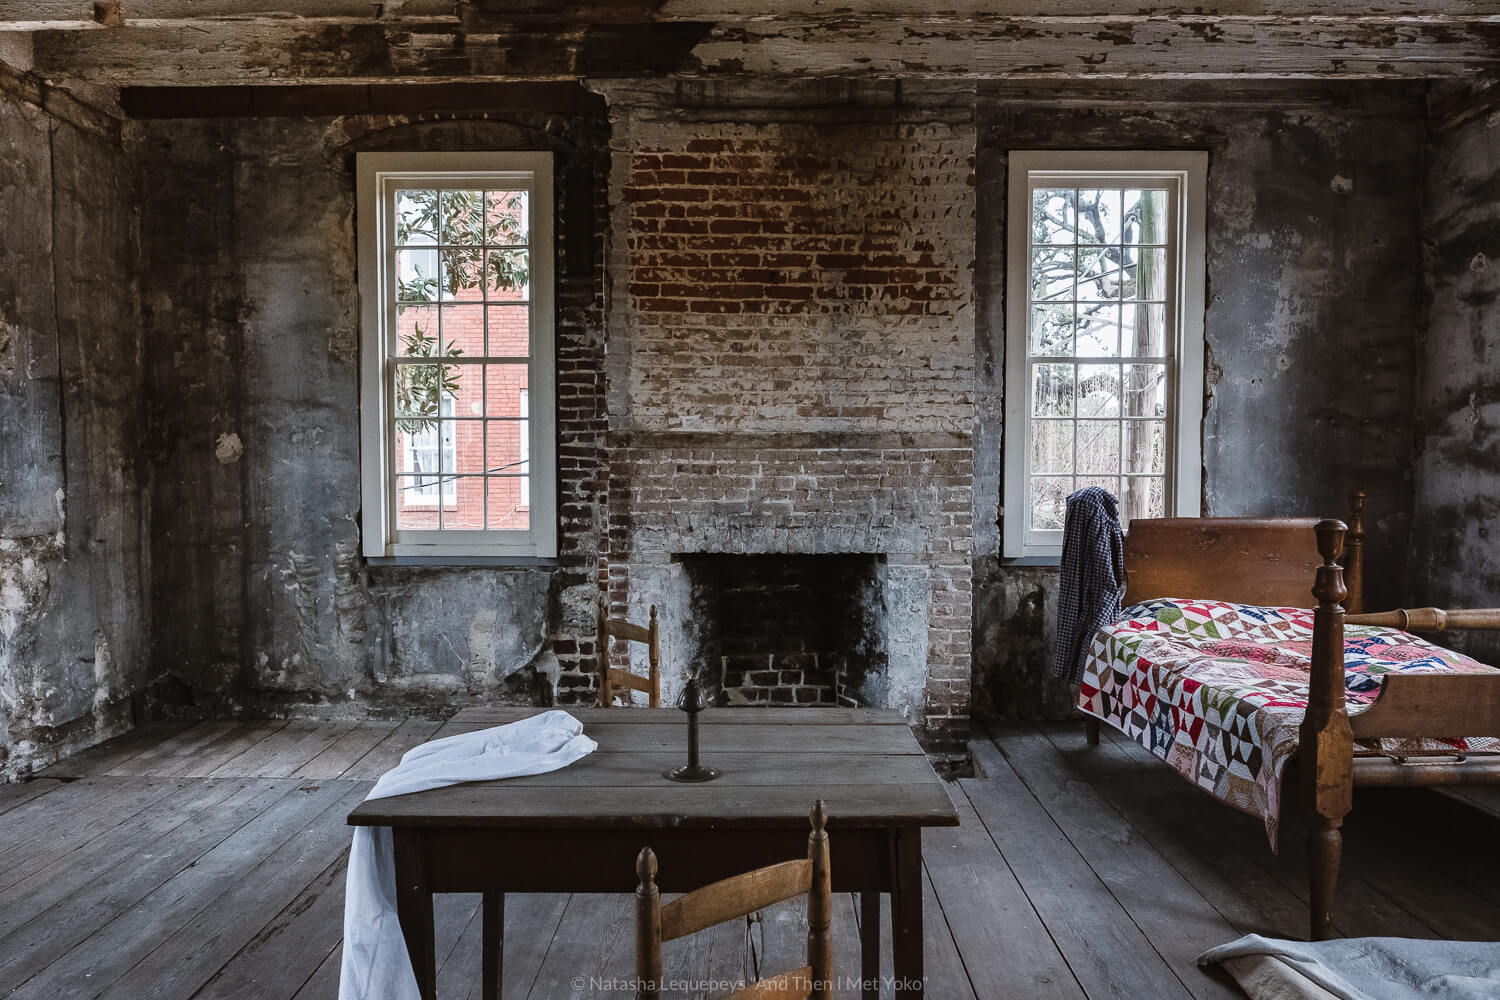 Bedroom inside the slave quarters of the Thomas-Owens house. Travel photography and guide by © Natasha Lequepeys for "And Then I Met Yoko". #savannah #usa #travelguide #travelblog